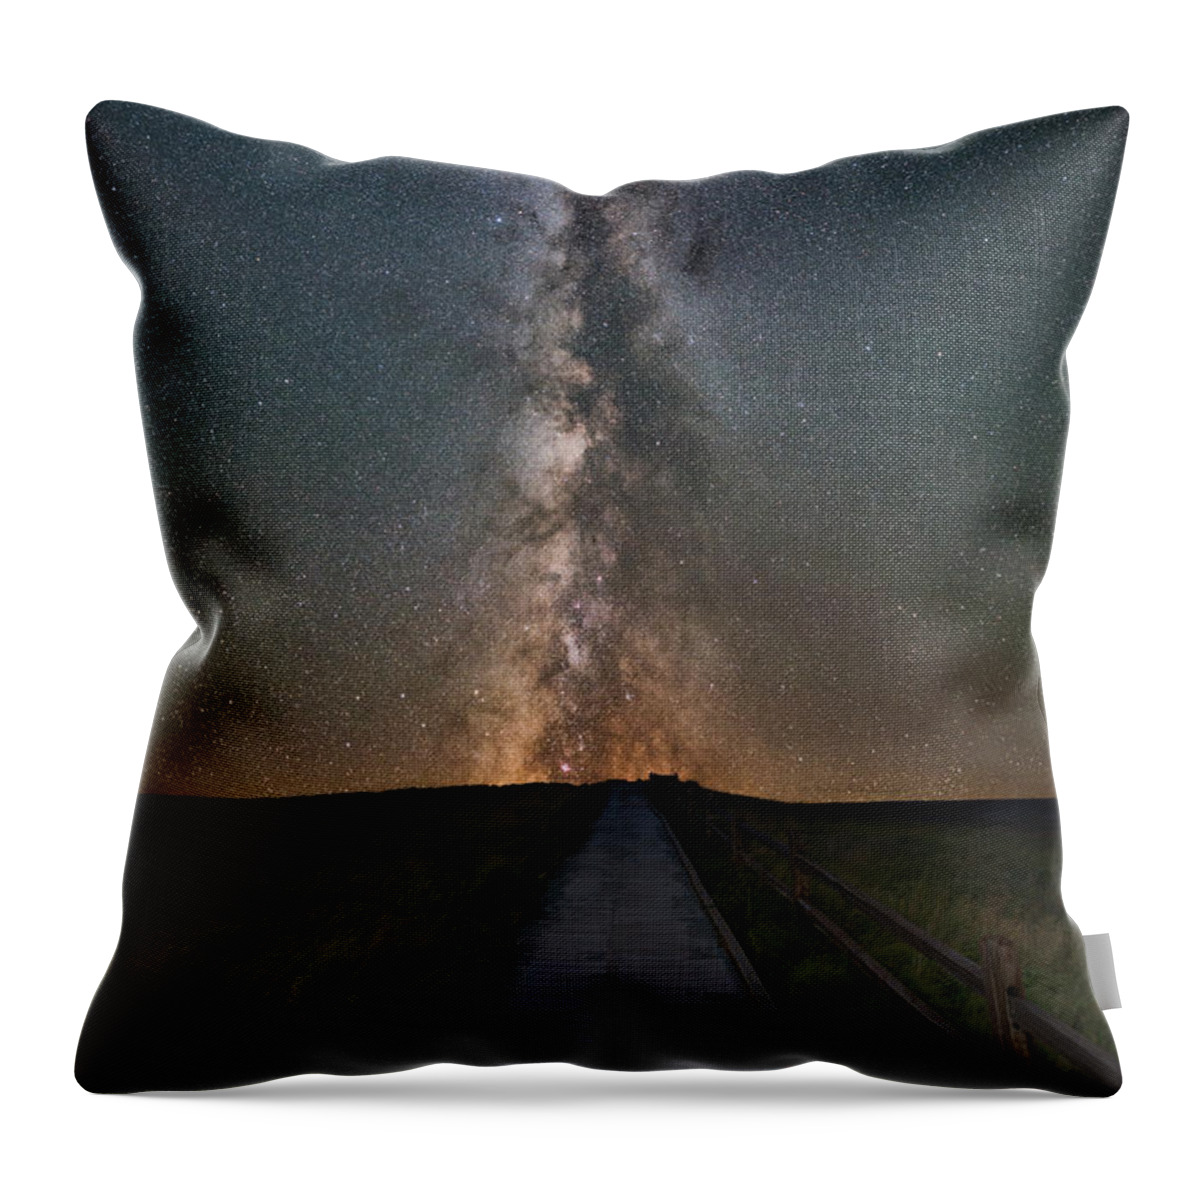 Path To The Stars Throw Pillow featuring the photograph Path To The Stars by Michael Ver Sprill